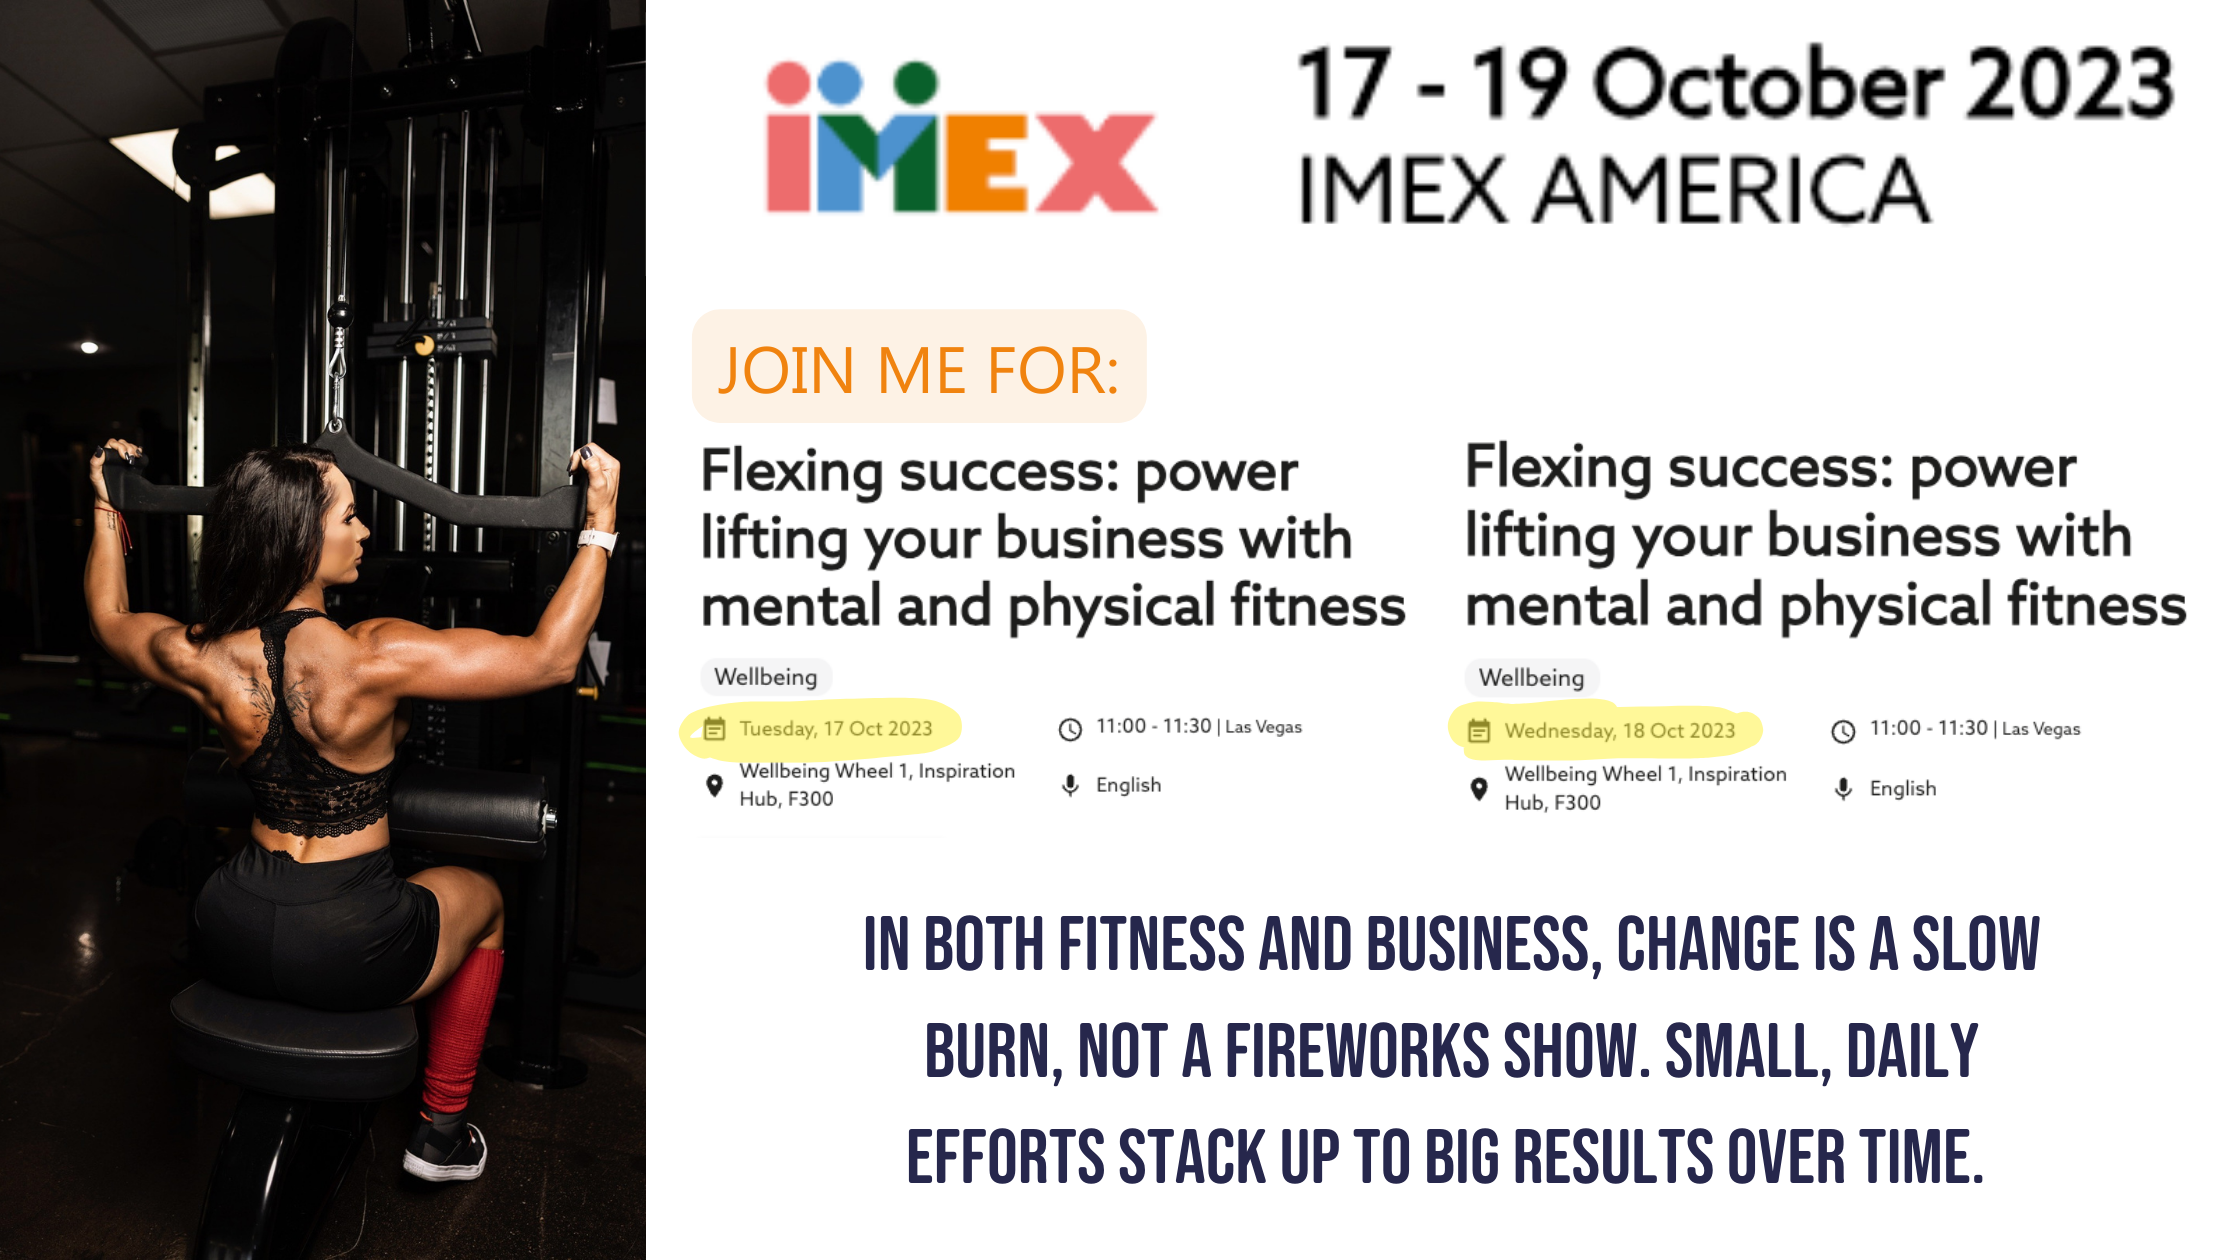 ???? Save the Date: 17th to 18th of October 2023. 17th Tue Sesh Link: https://imexamerica.com/newfront/sessions/17079 18th Wed Sesh Link: https://imexamerica.com/newfront/sessions/17280 